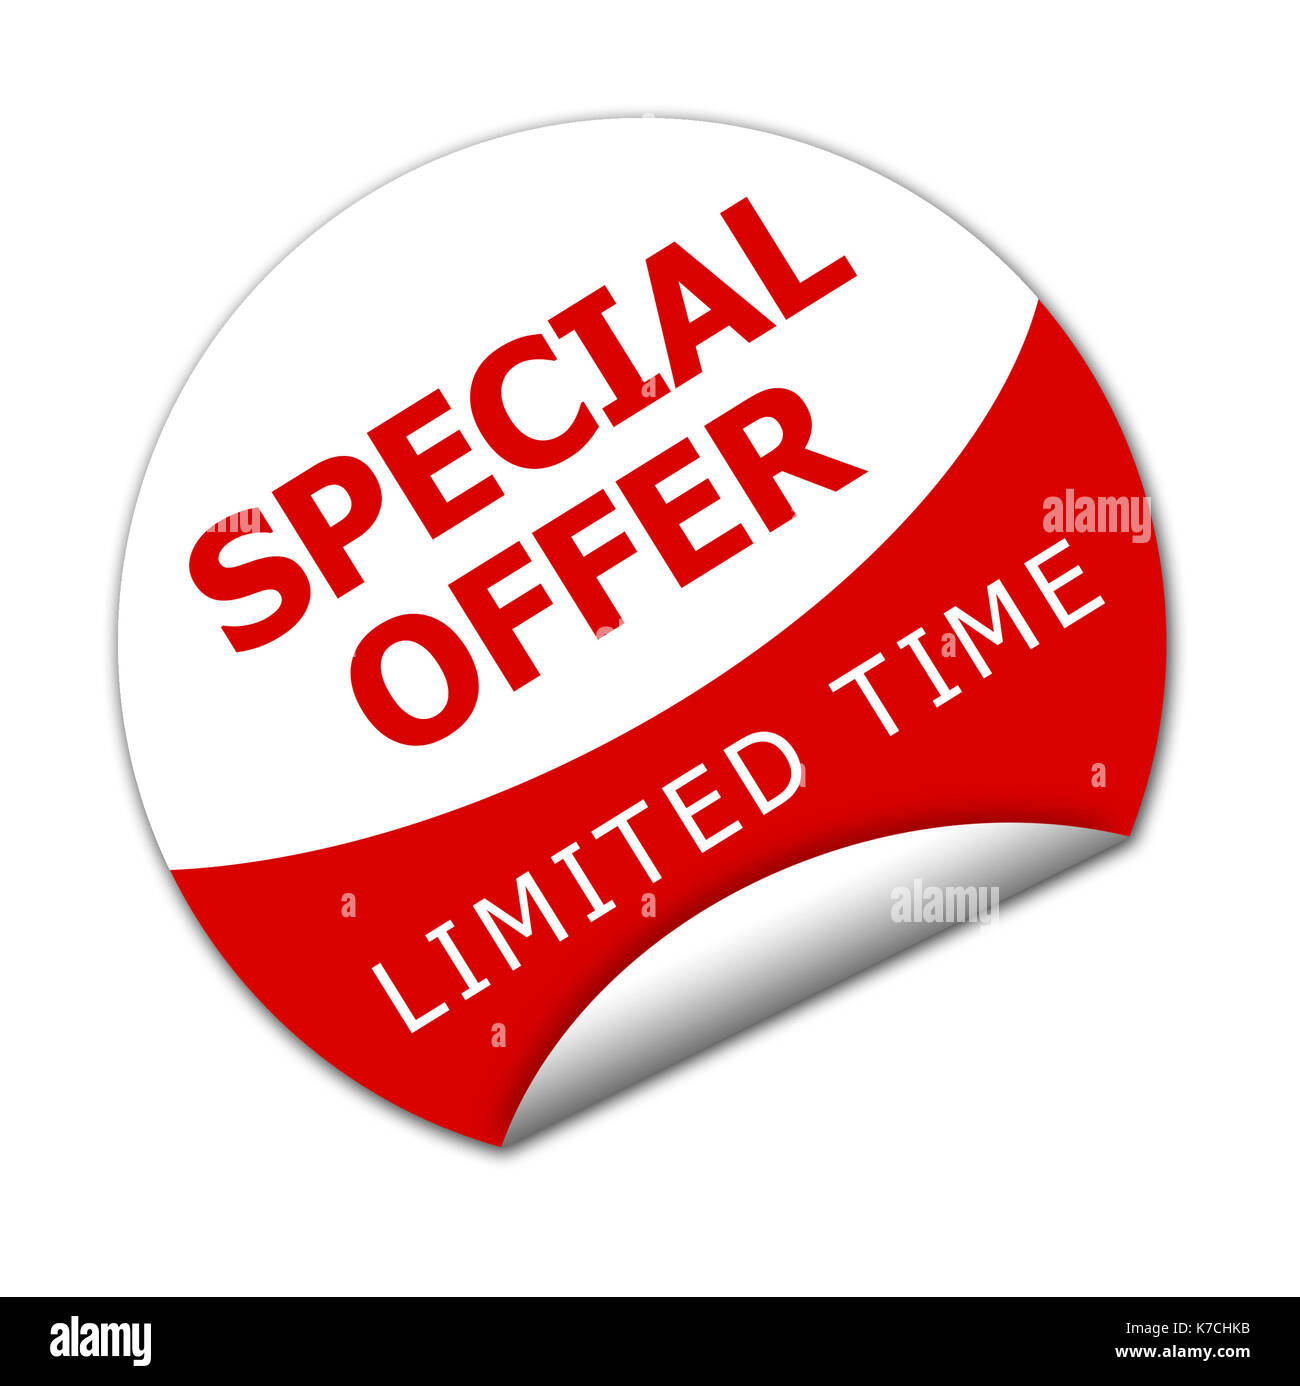 Special offer for limited time sticker Stock Photo - Alamy